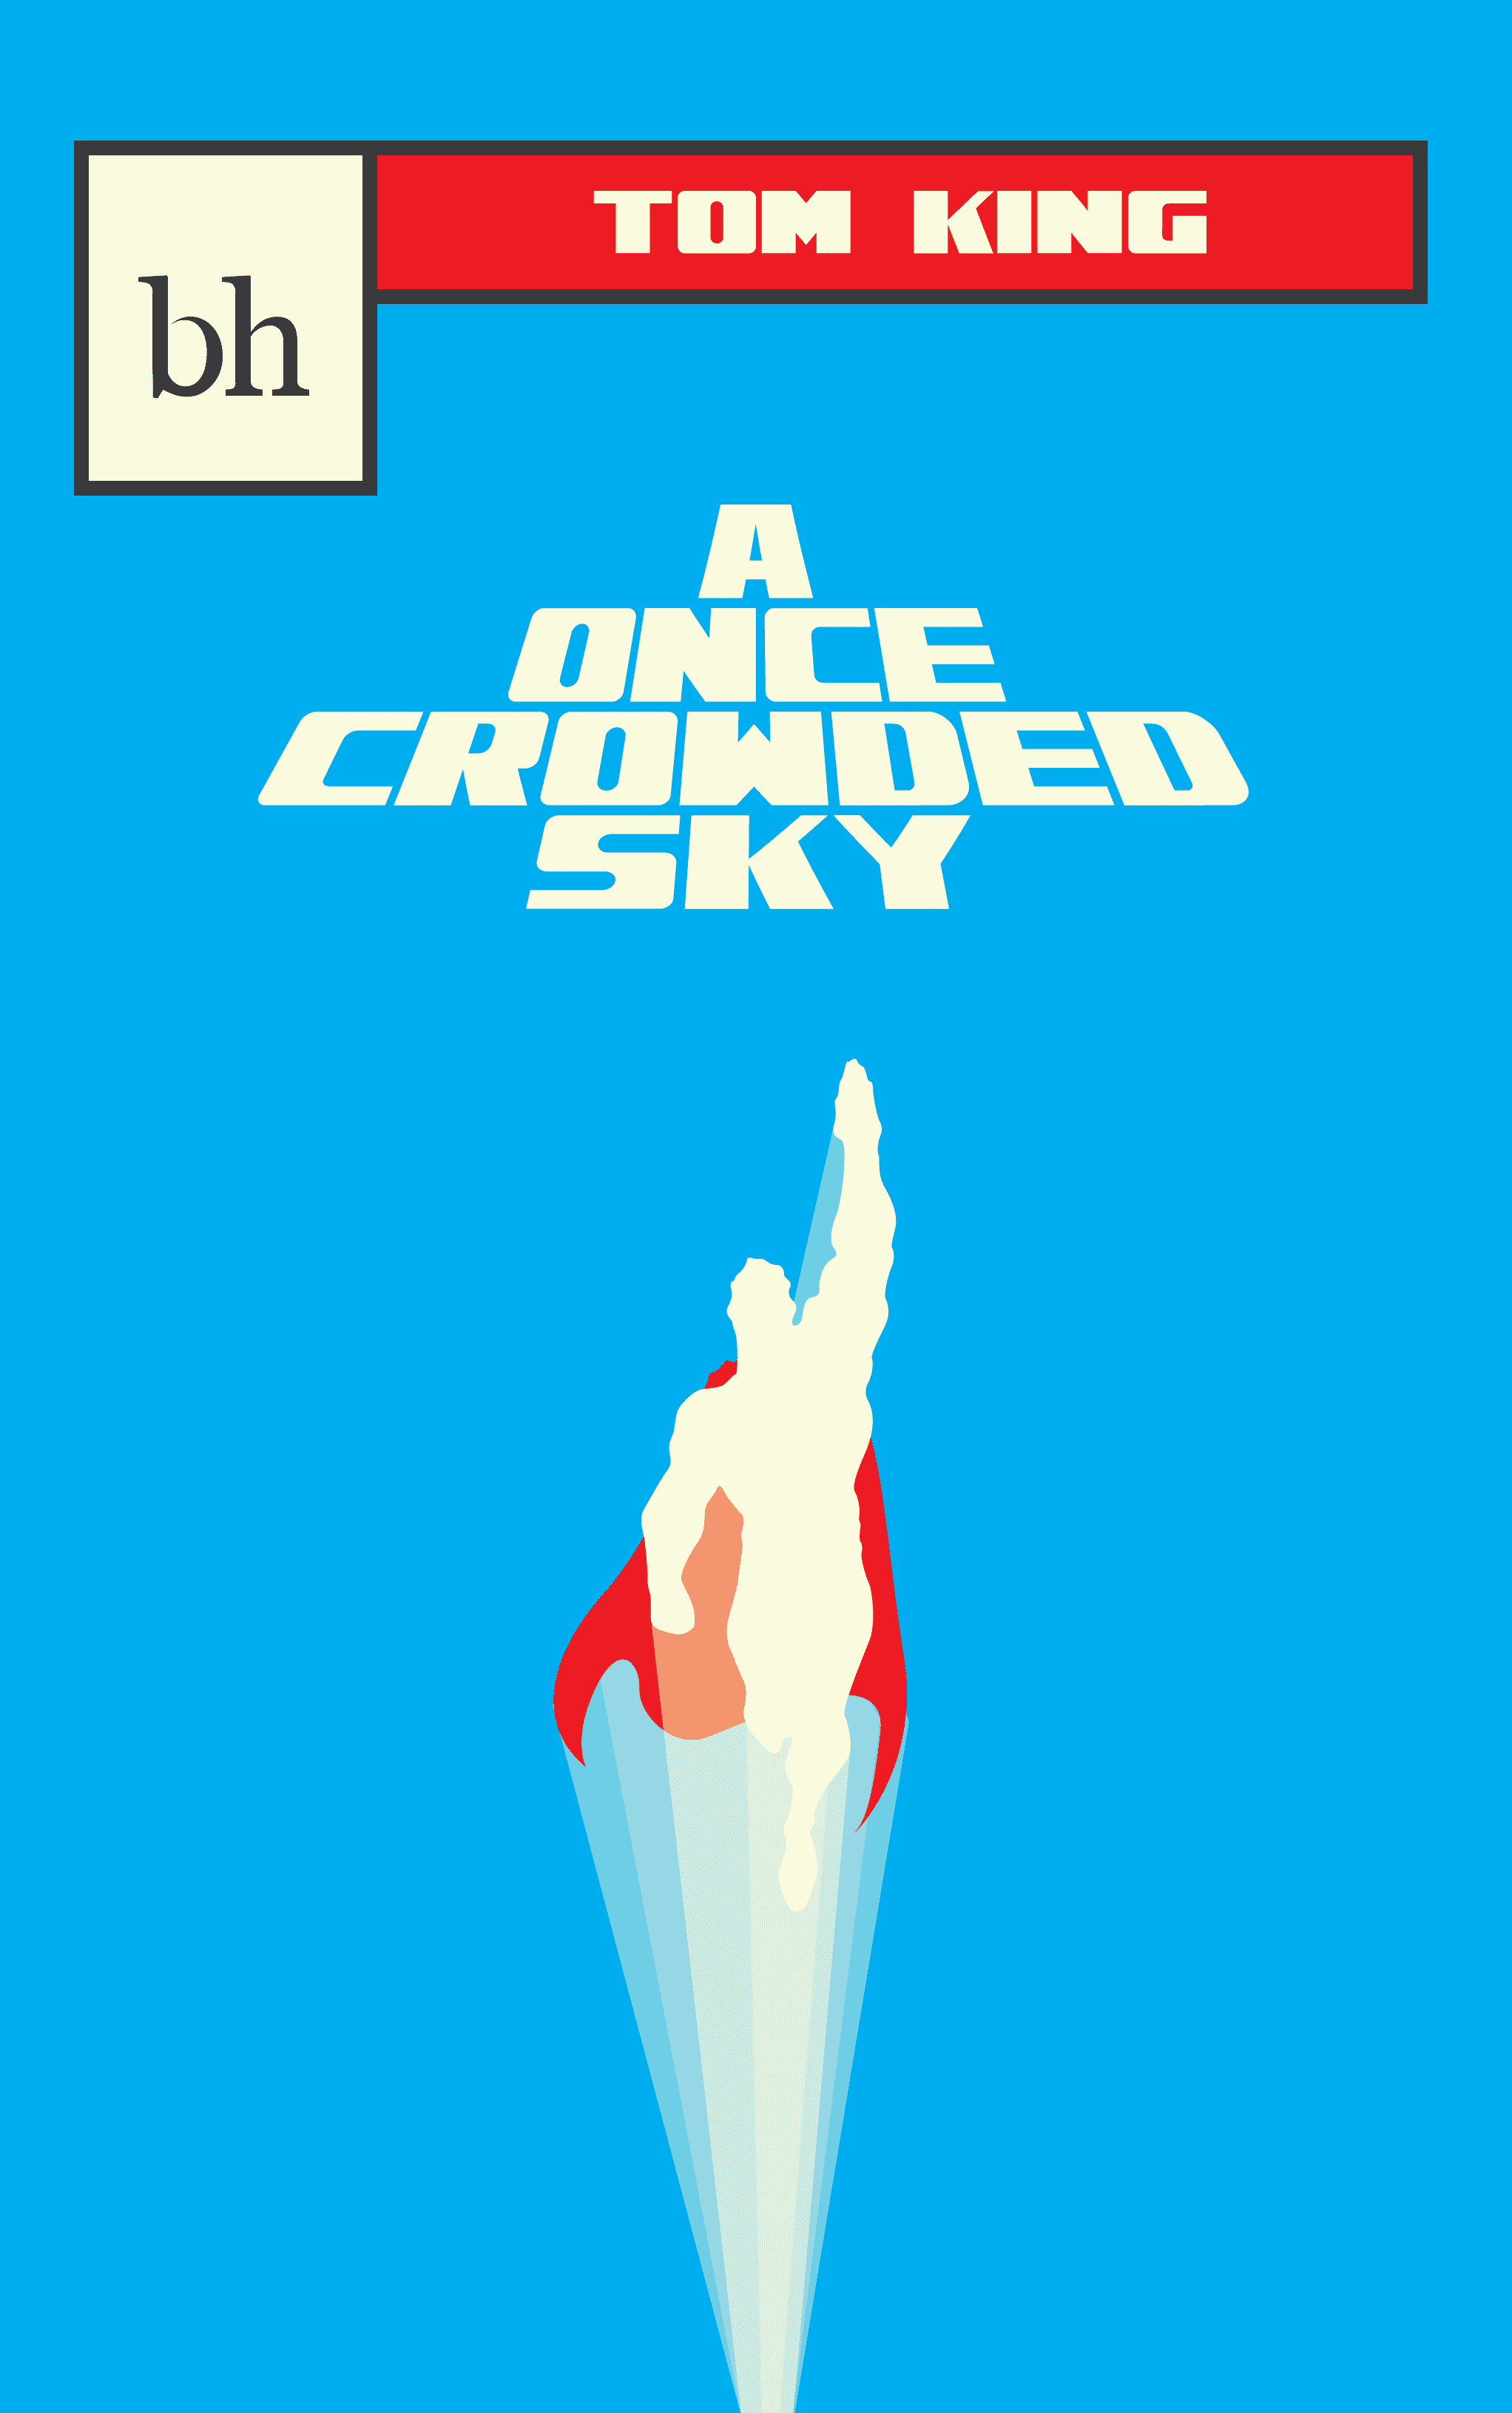 Book cover mock thumbnail for A Once Crowded Sky